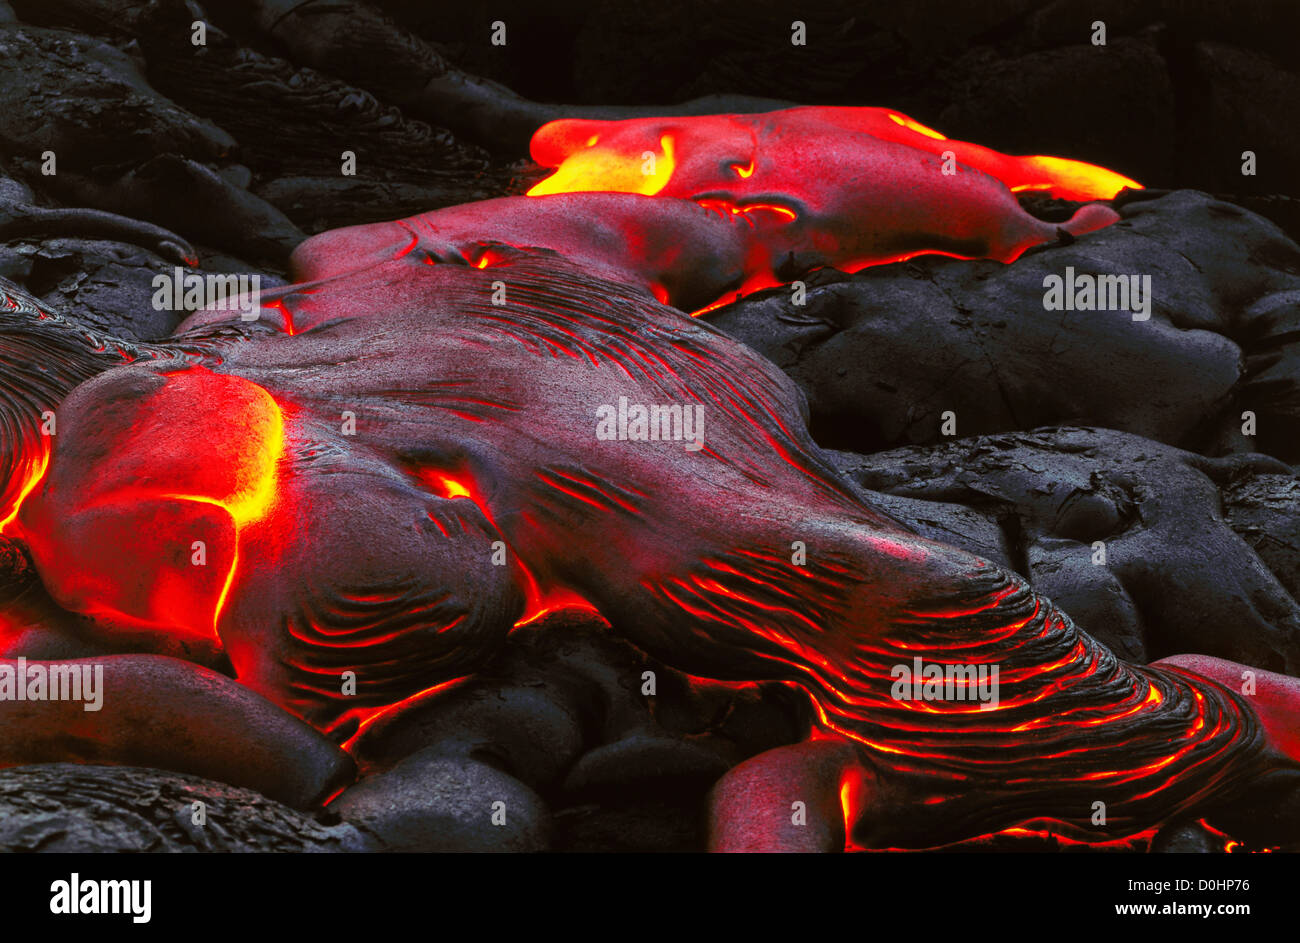 Slow Moving Glowing Hot Pahoehoe Begins to Cool Stock Photo